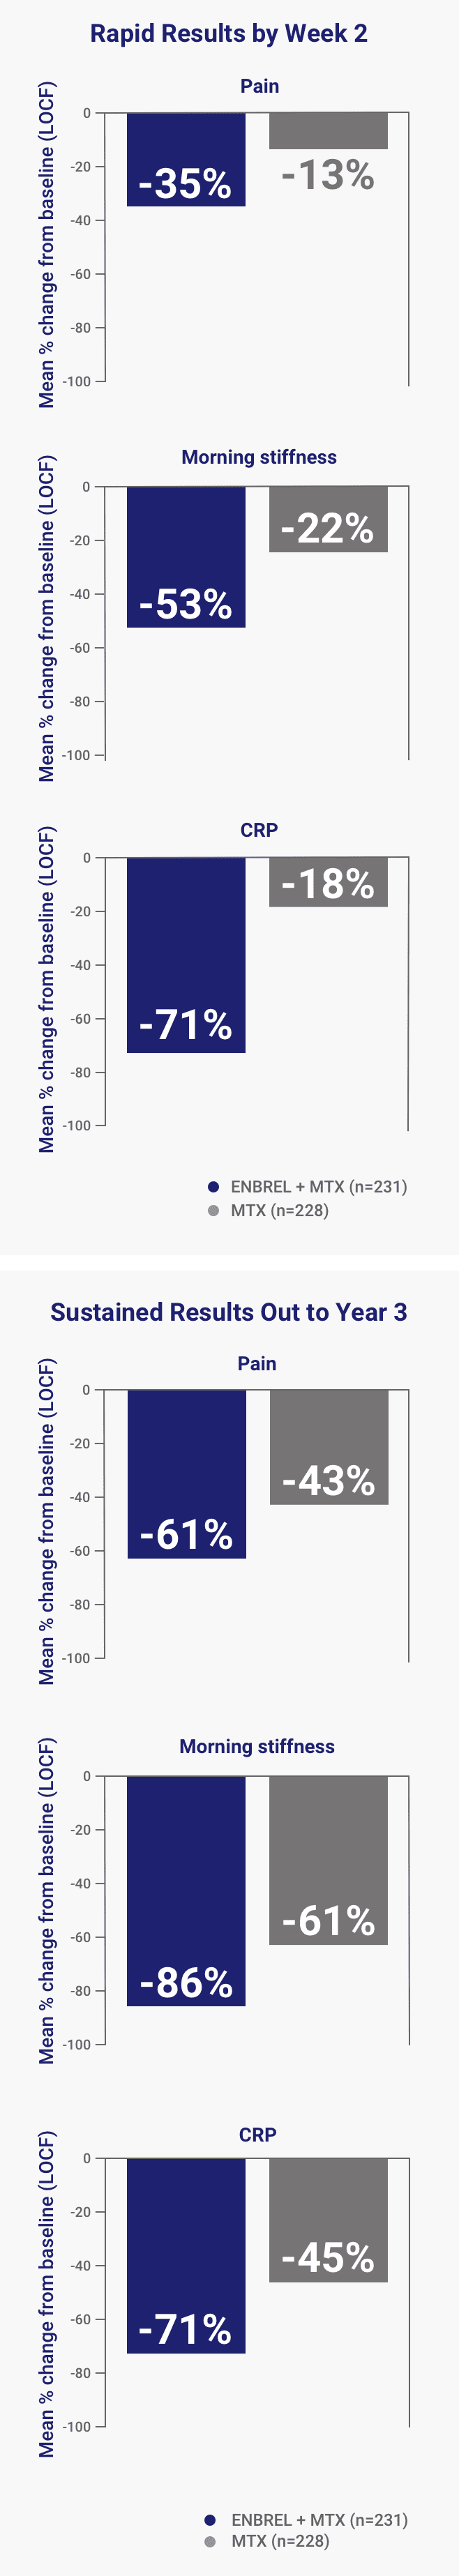 A chart from the ENBREL TEMPO Study of the reductions in pain, morning stiffness, and C-reactive protein (CRP). A chart from the ENBREL TEMPO Study of the sustained results out to Year 3.